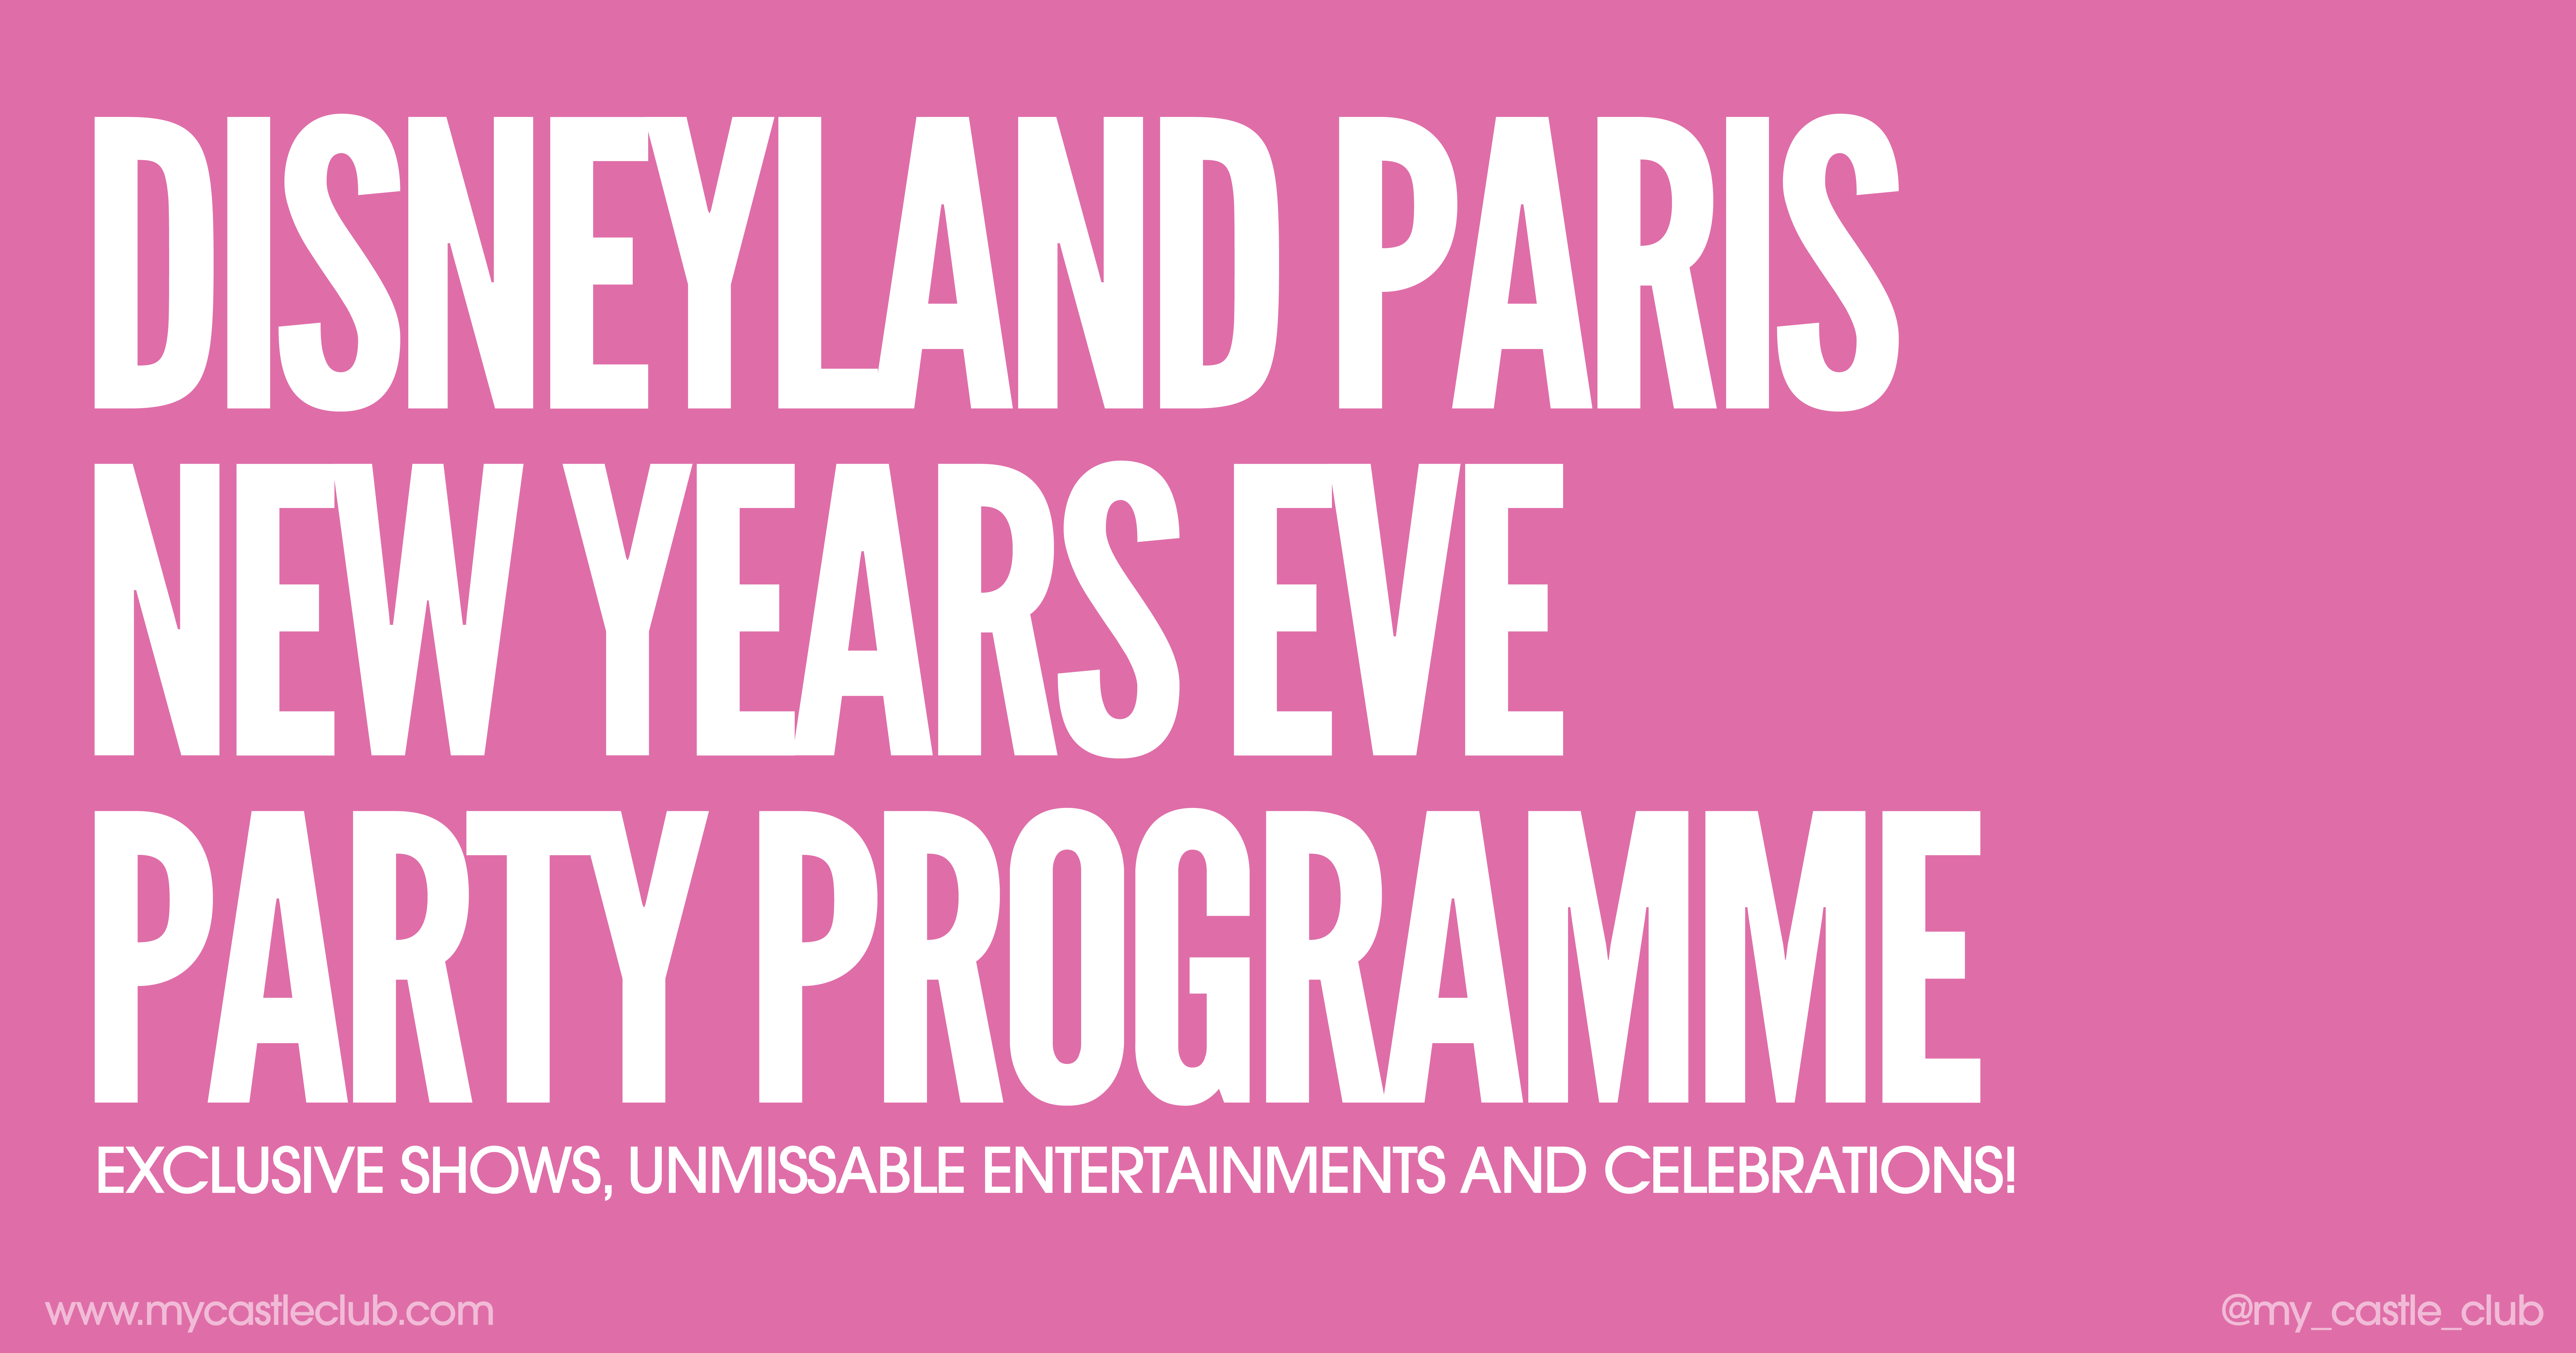 Disneyland Paris New Years Eve Party Programme Released 2022!